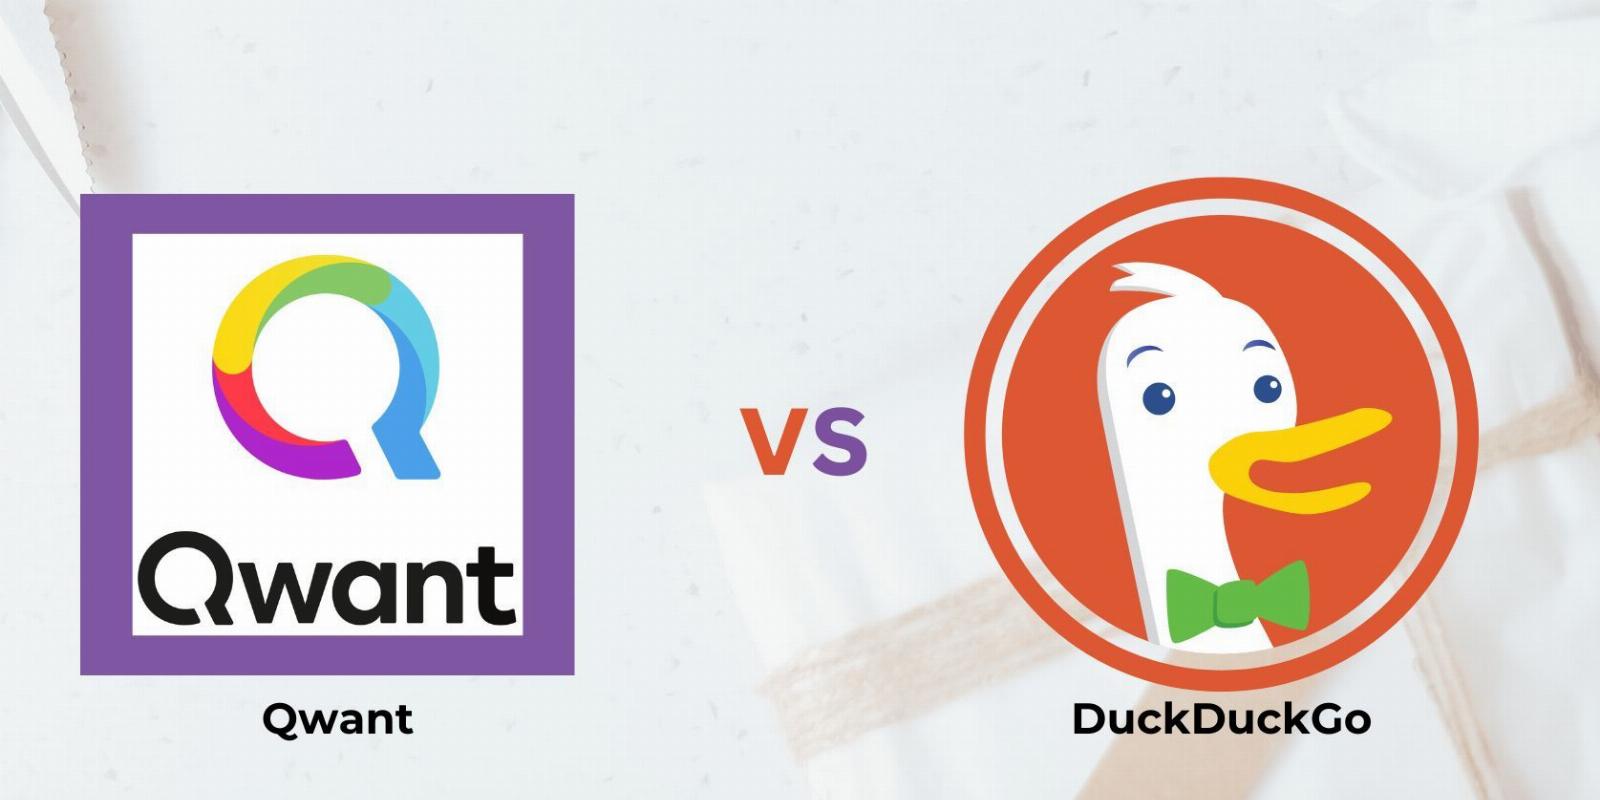 Qwant vs. DuckDuckGo: Which Search Engine Is More Private?